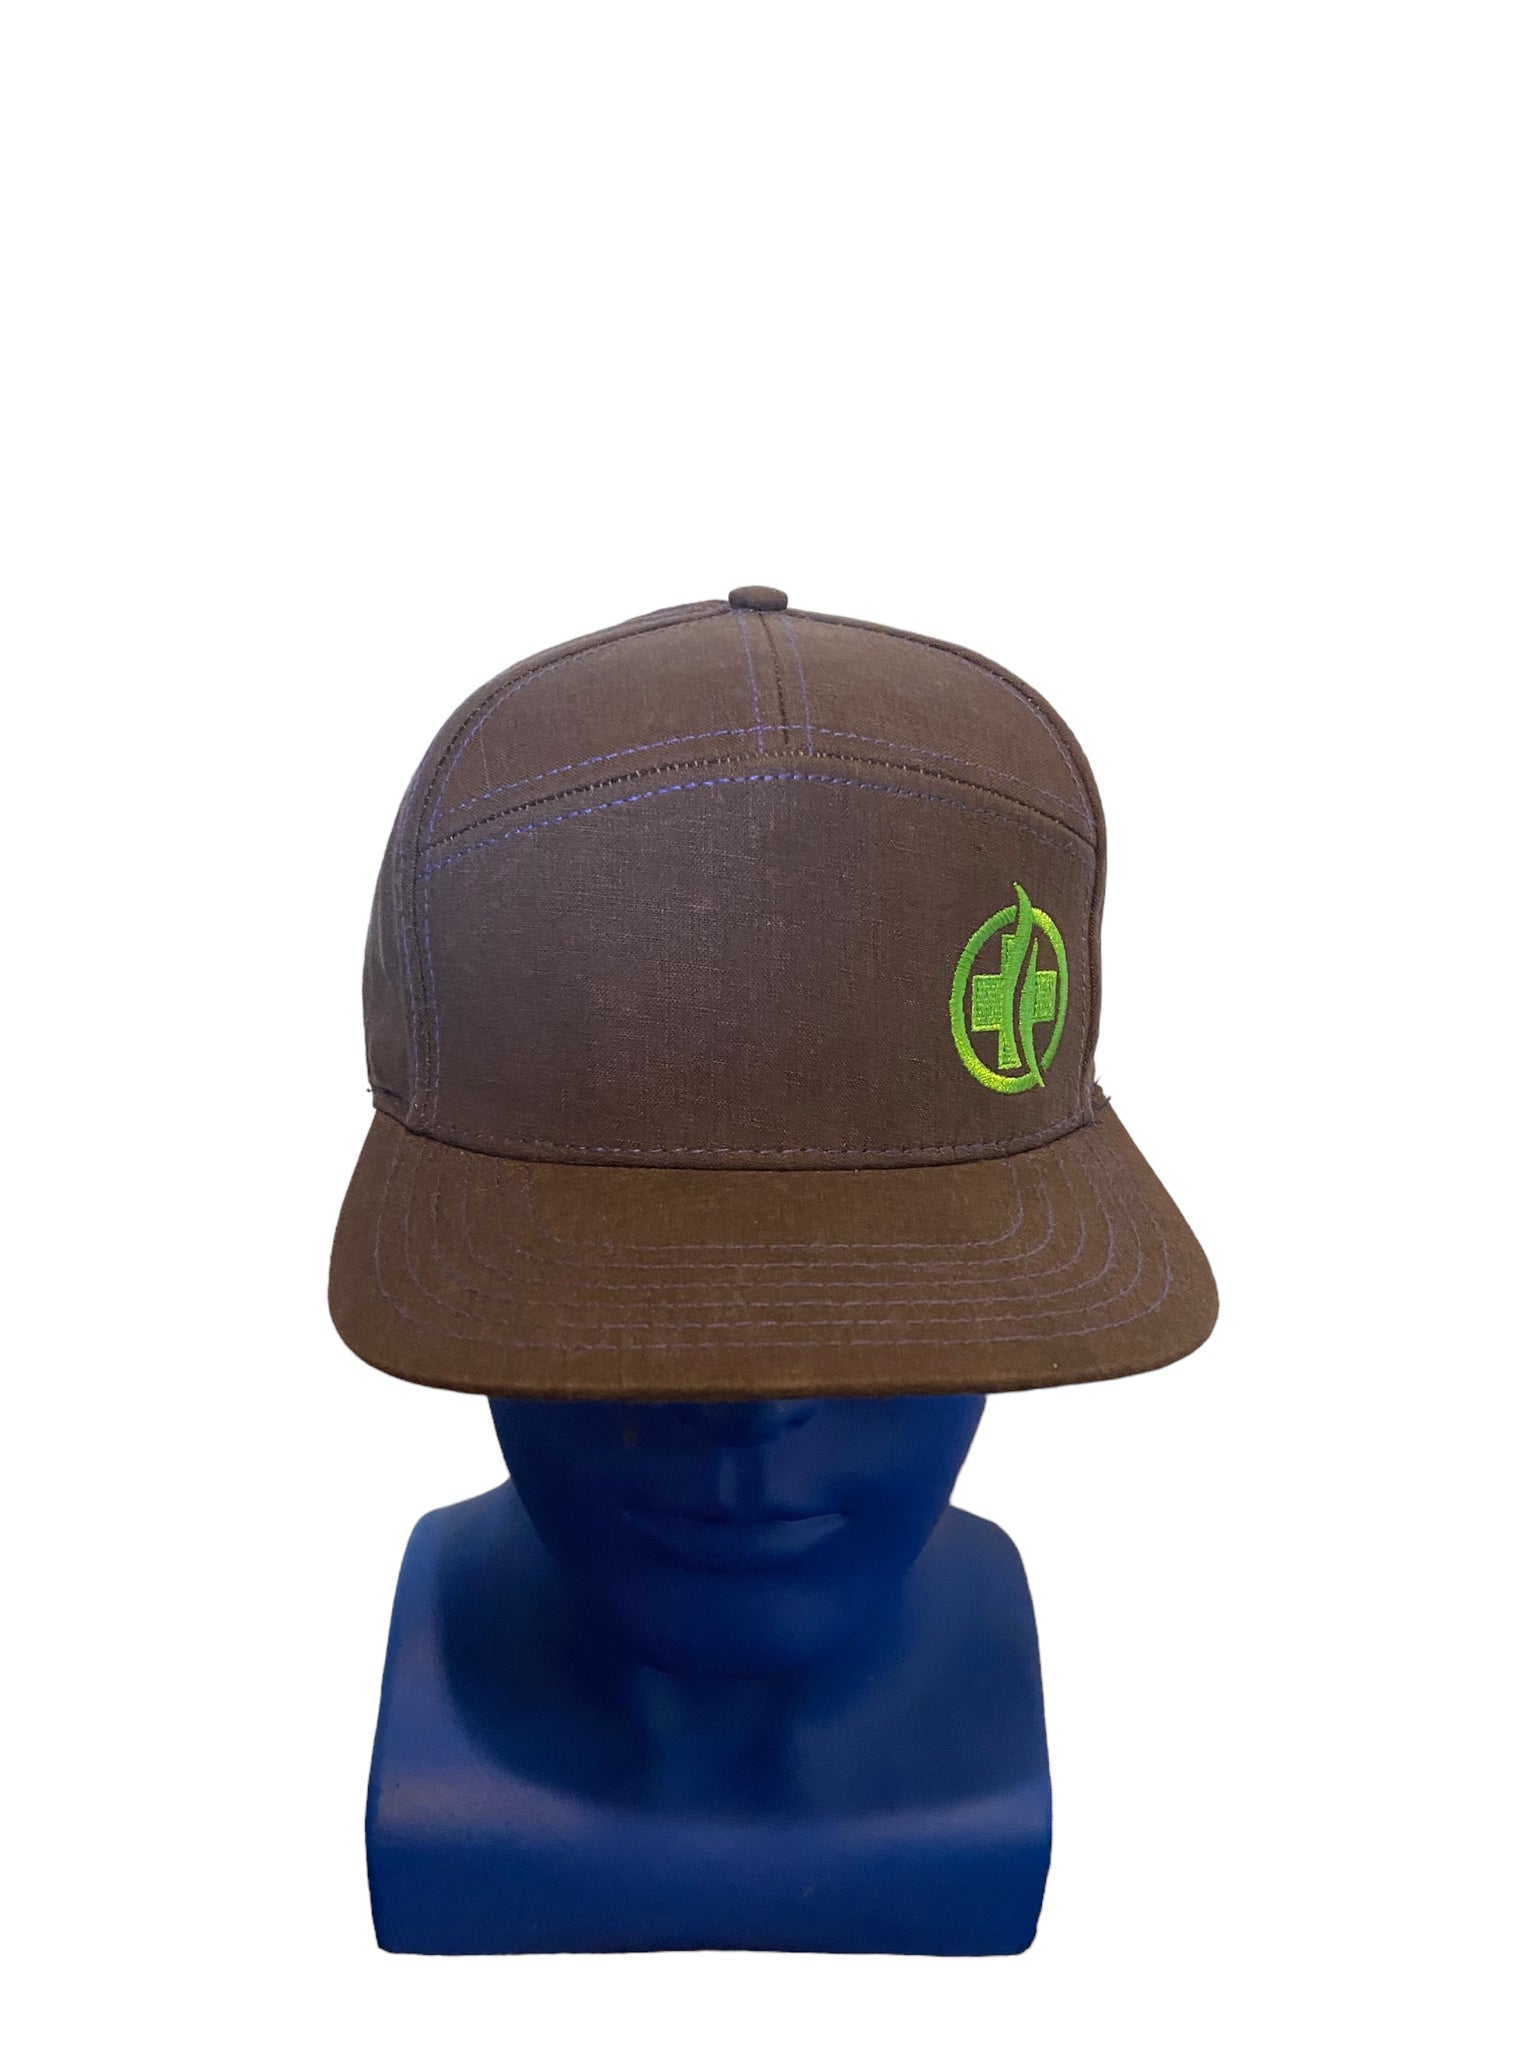 Oak And Marble Herbal Healing Gray With Purple Stitching Snapback Hat